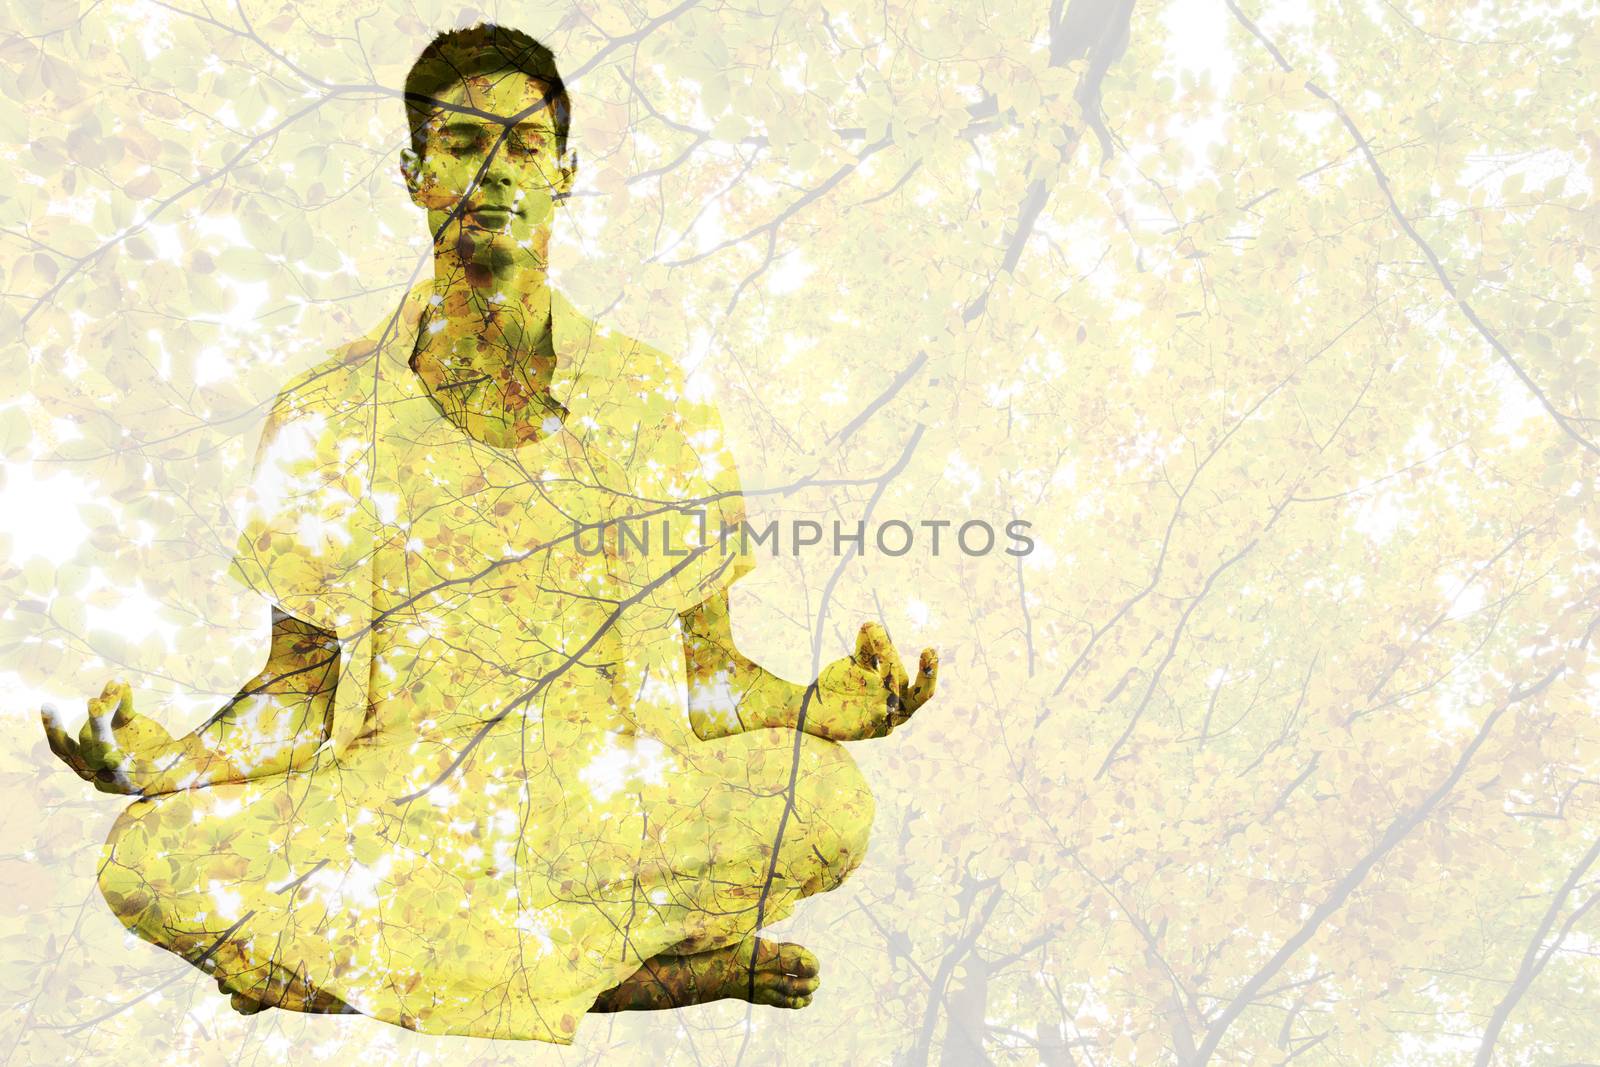 Handsome man in white meditating in lotus pose against branches and autumnal leaves